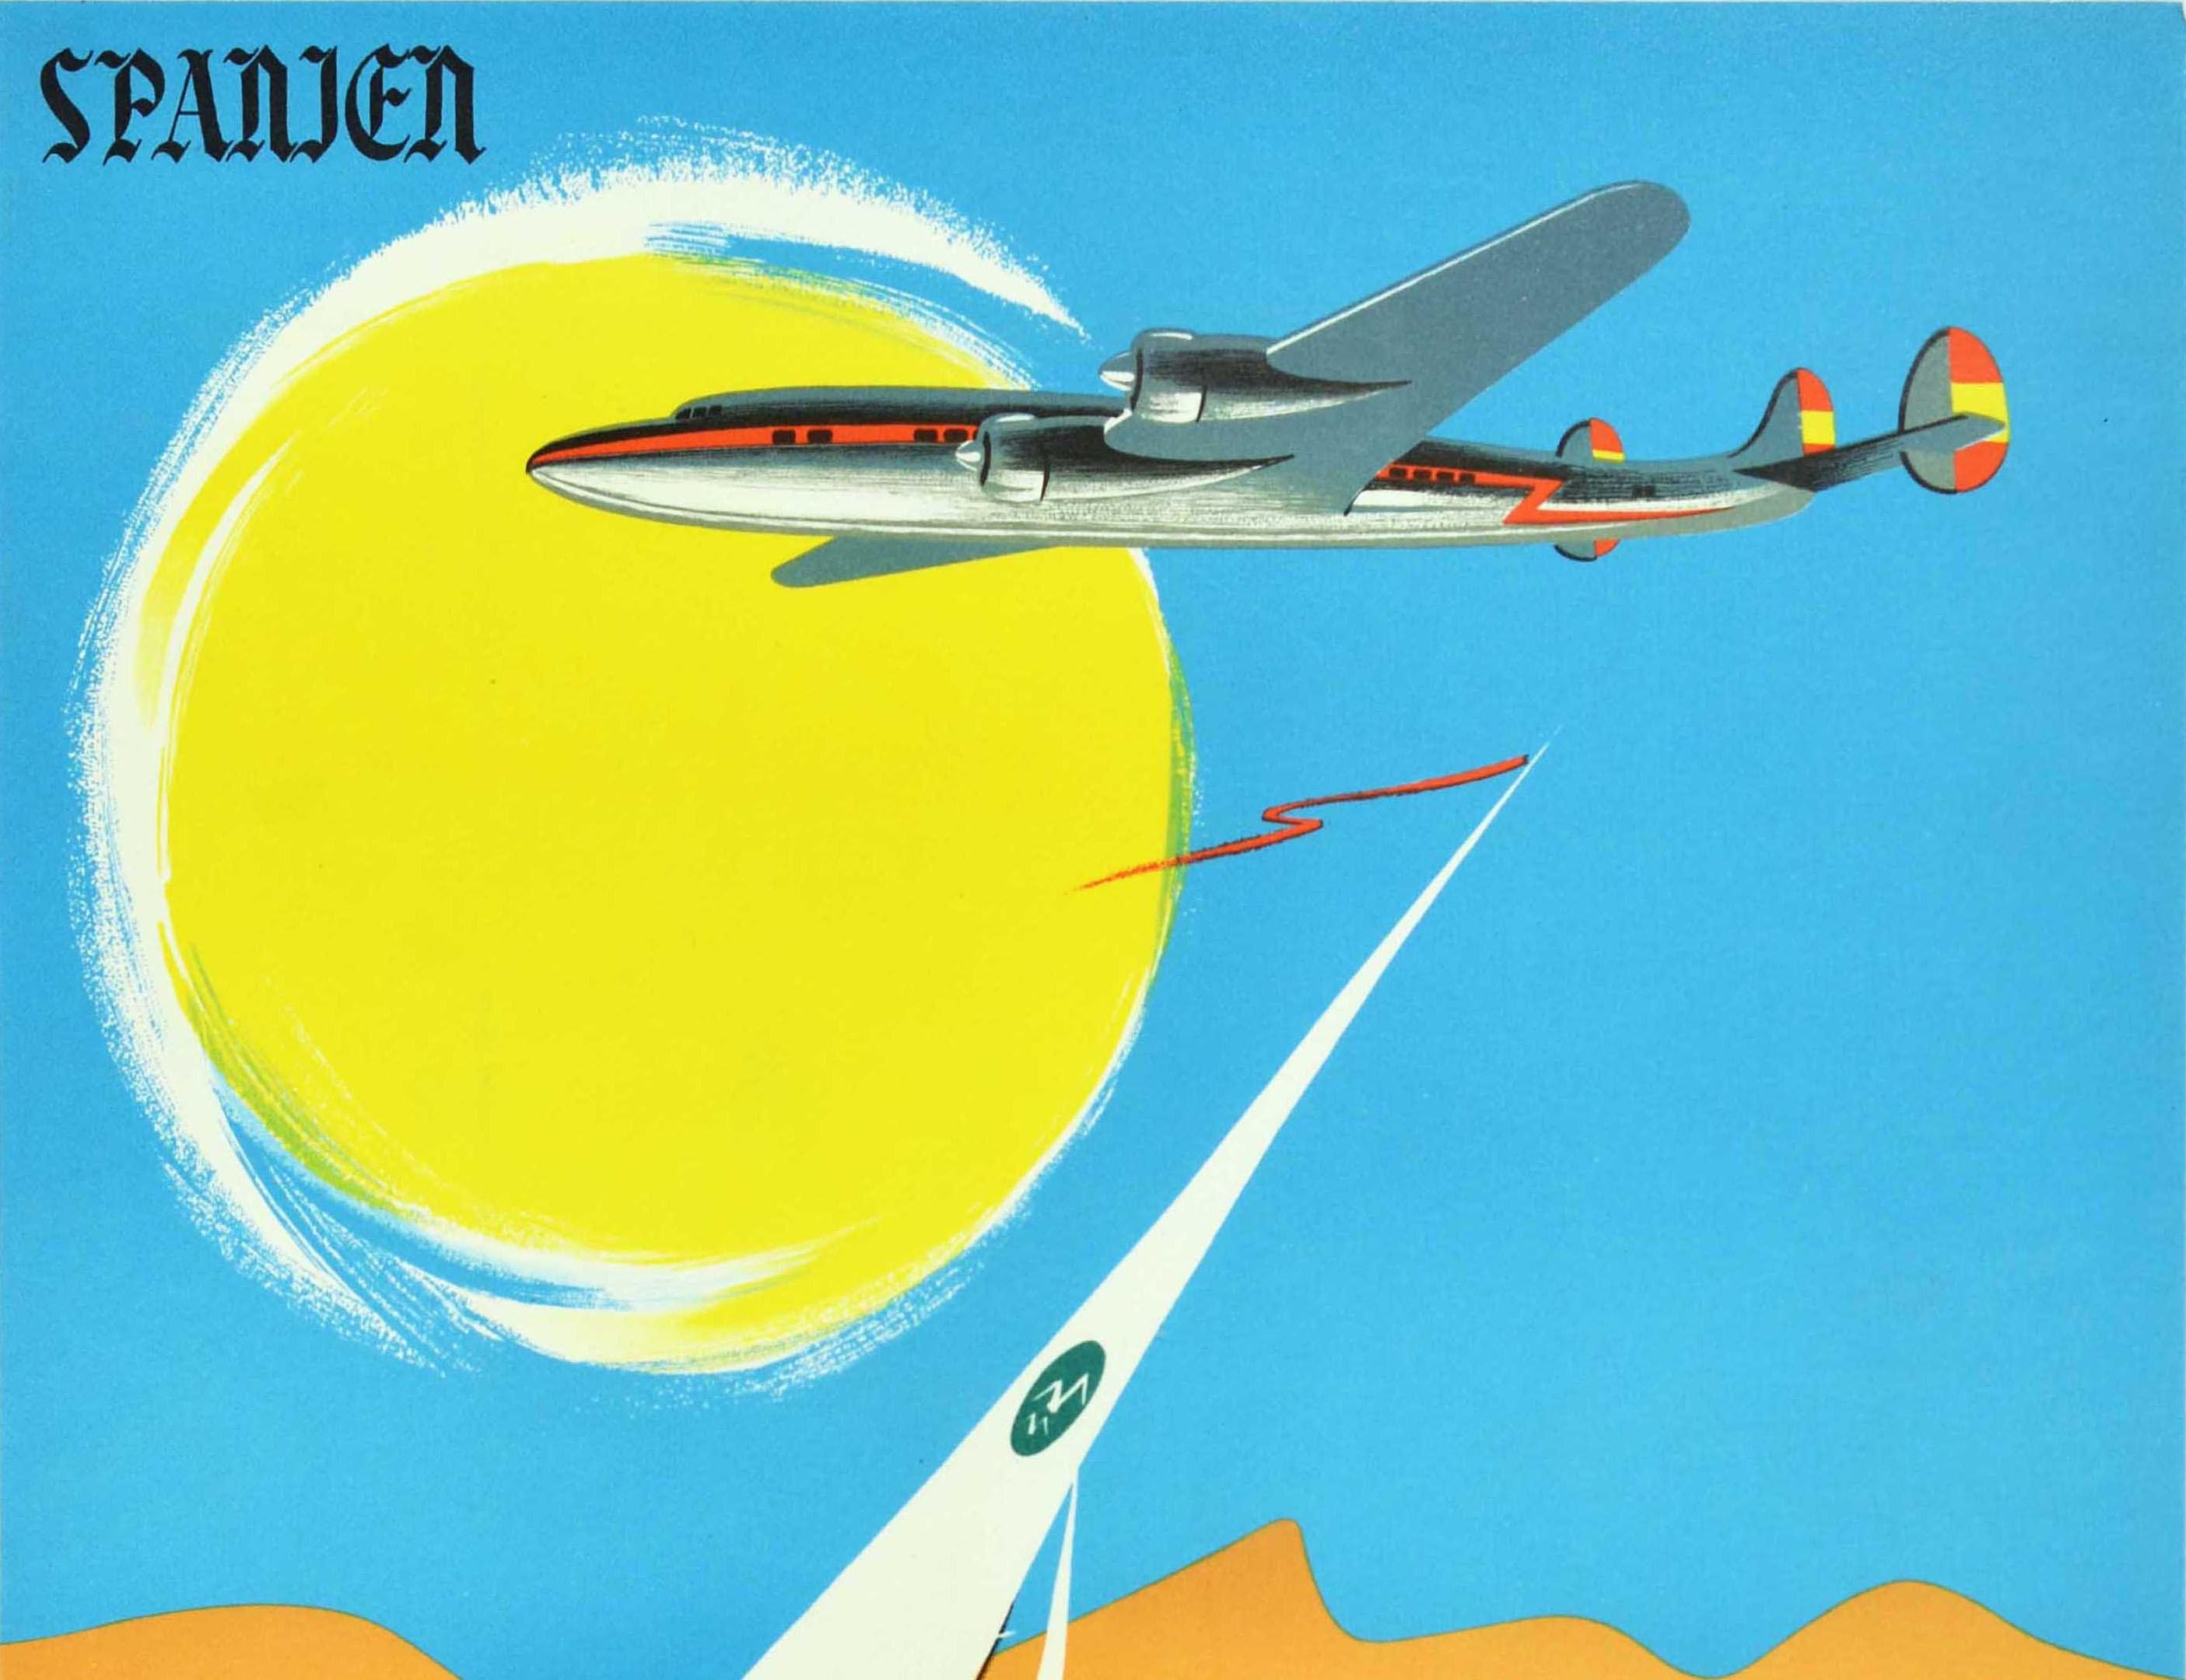 Original vintage Spanish airline travel poster issued by Iberia Lineas Aereas de Espana in German for the Costa Del Sol Malaga in Spain / Spanien featuring a colourful illustration of an Iberia Lockheed Constellation plane flying in front of bright